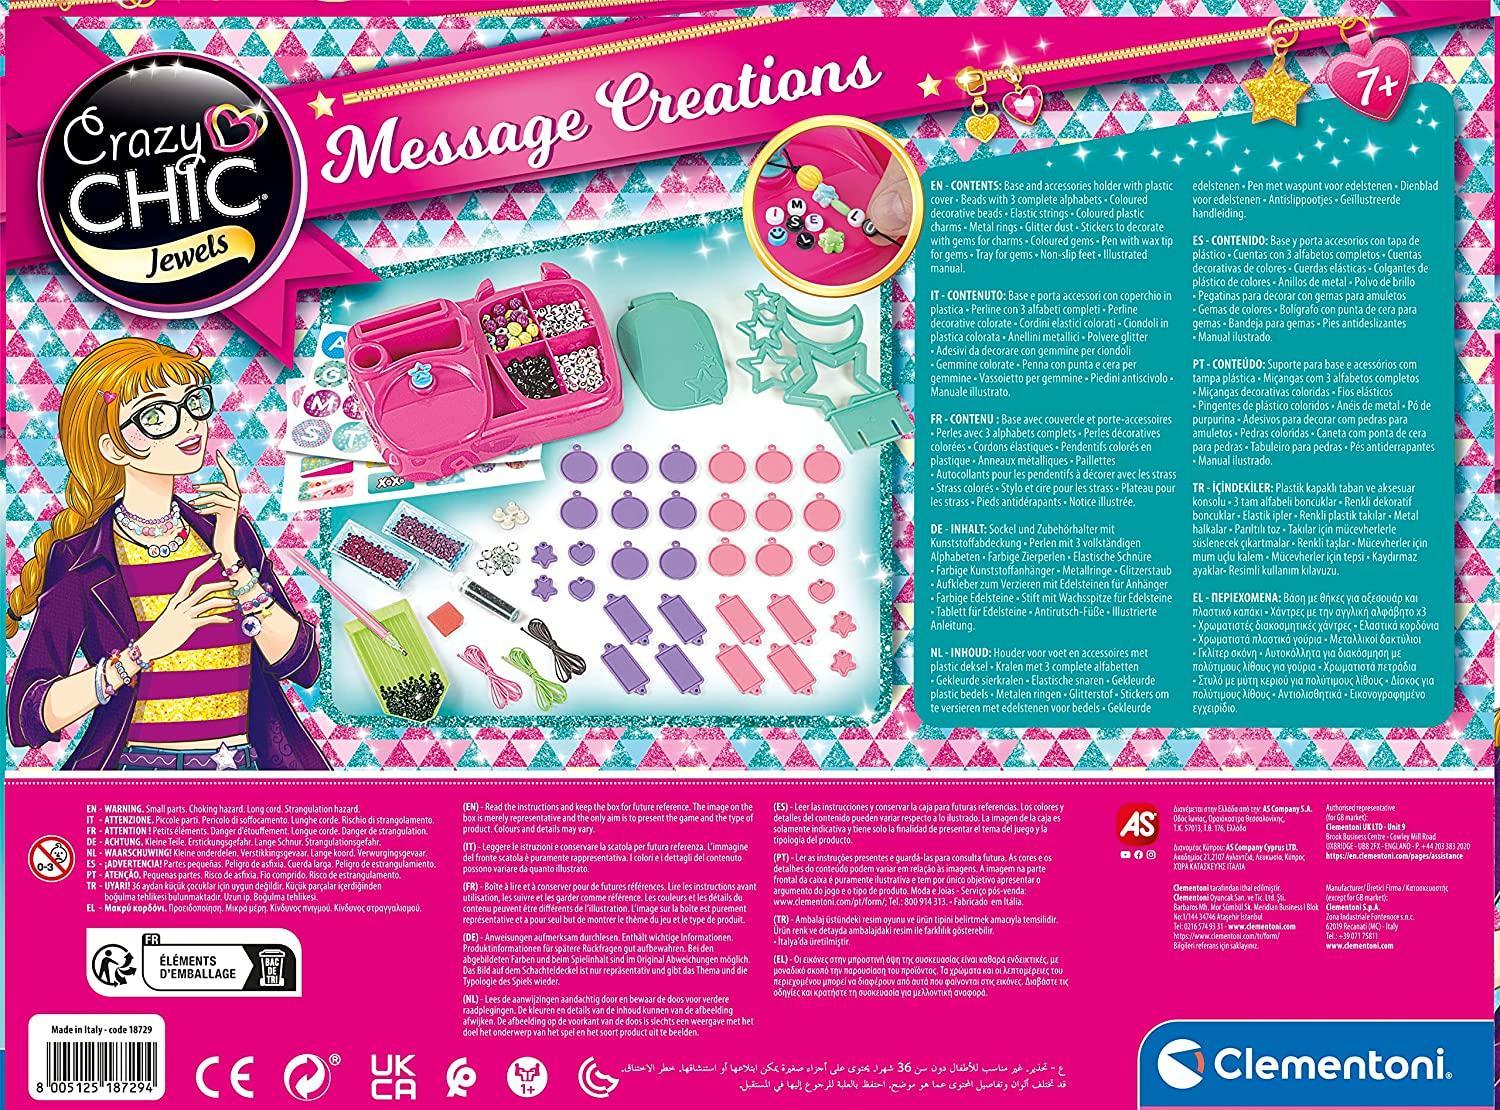 clementoni crazy chic message creations